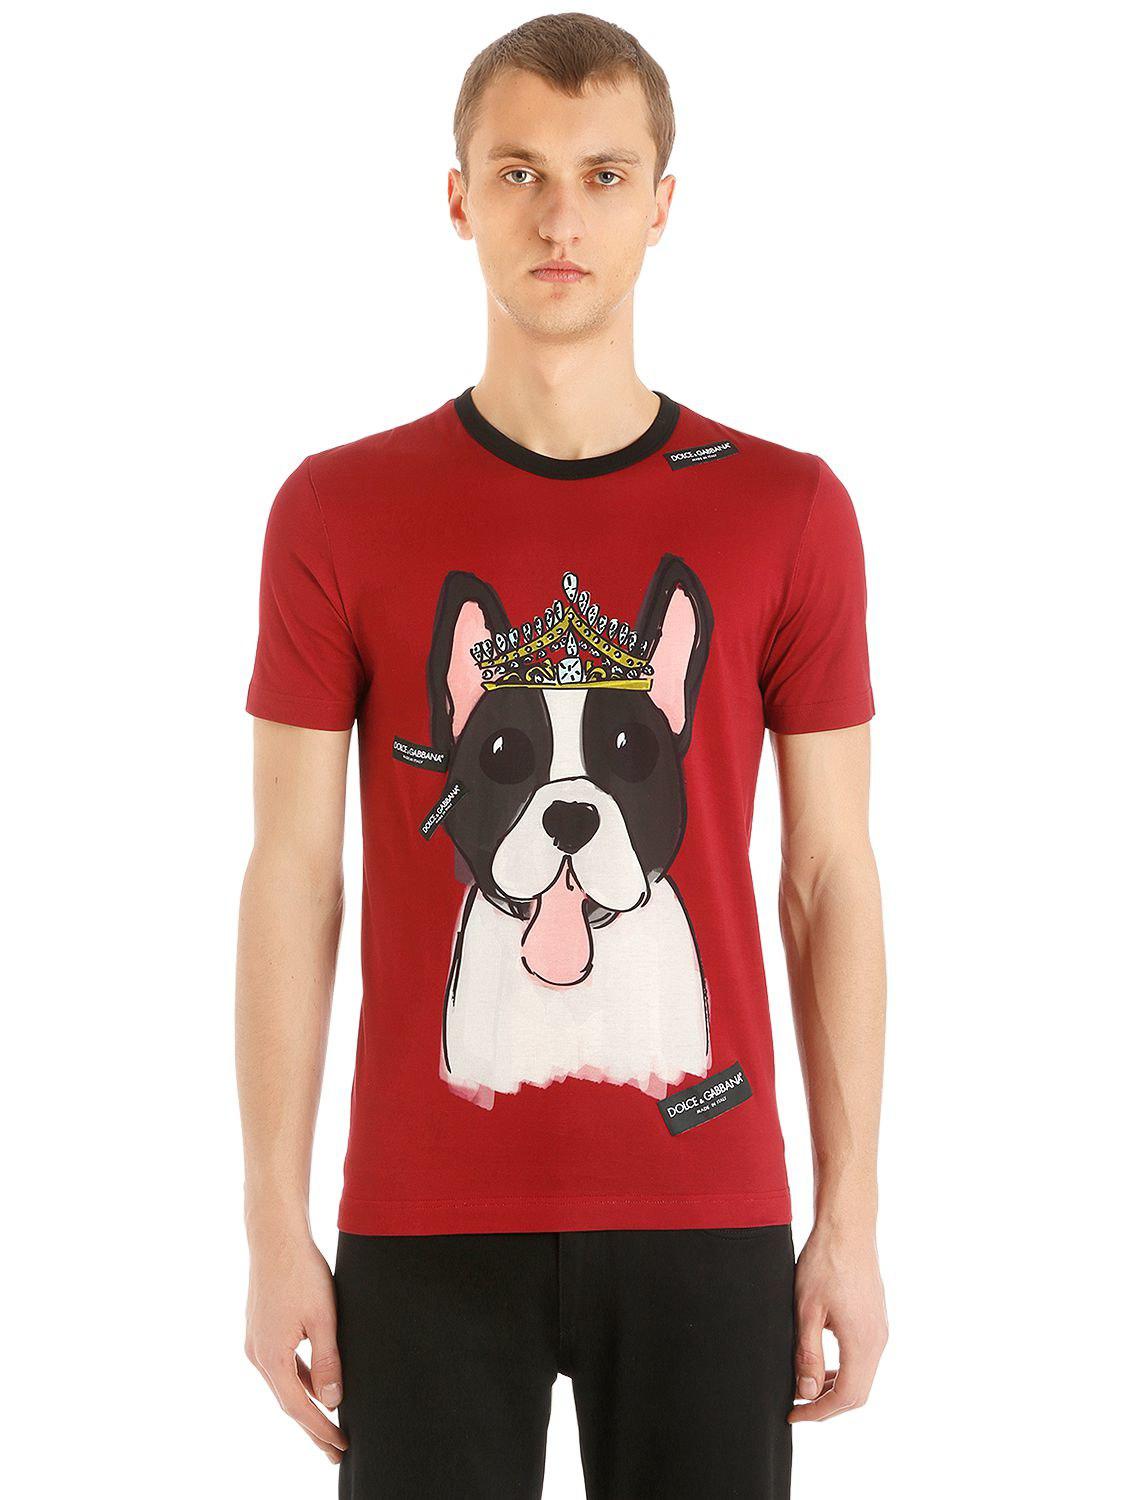 Dolce & Gabbana Year Of The Dog Cotton Jersey T-shirt in Red for Men - Lyst